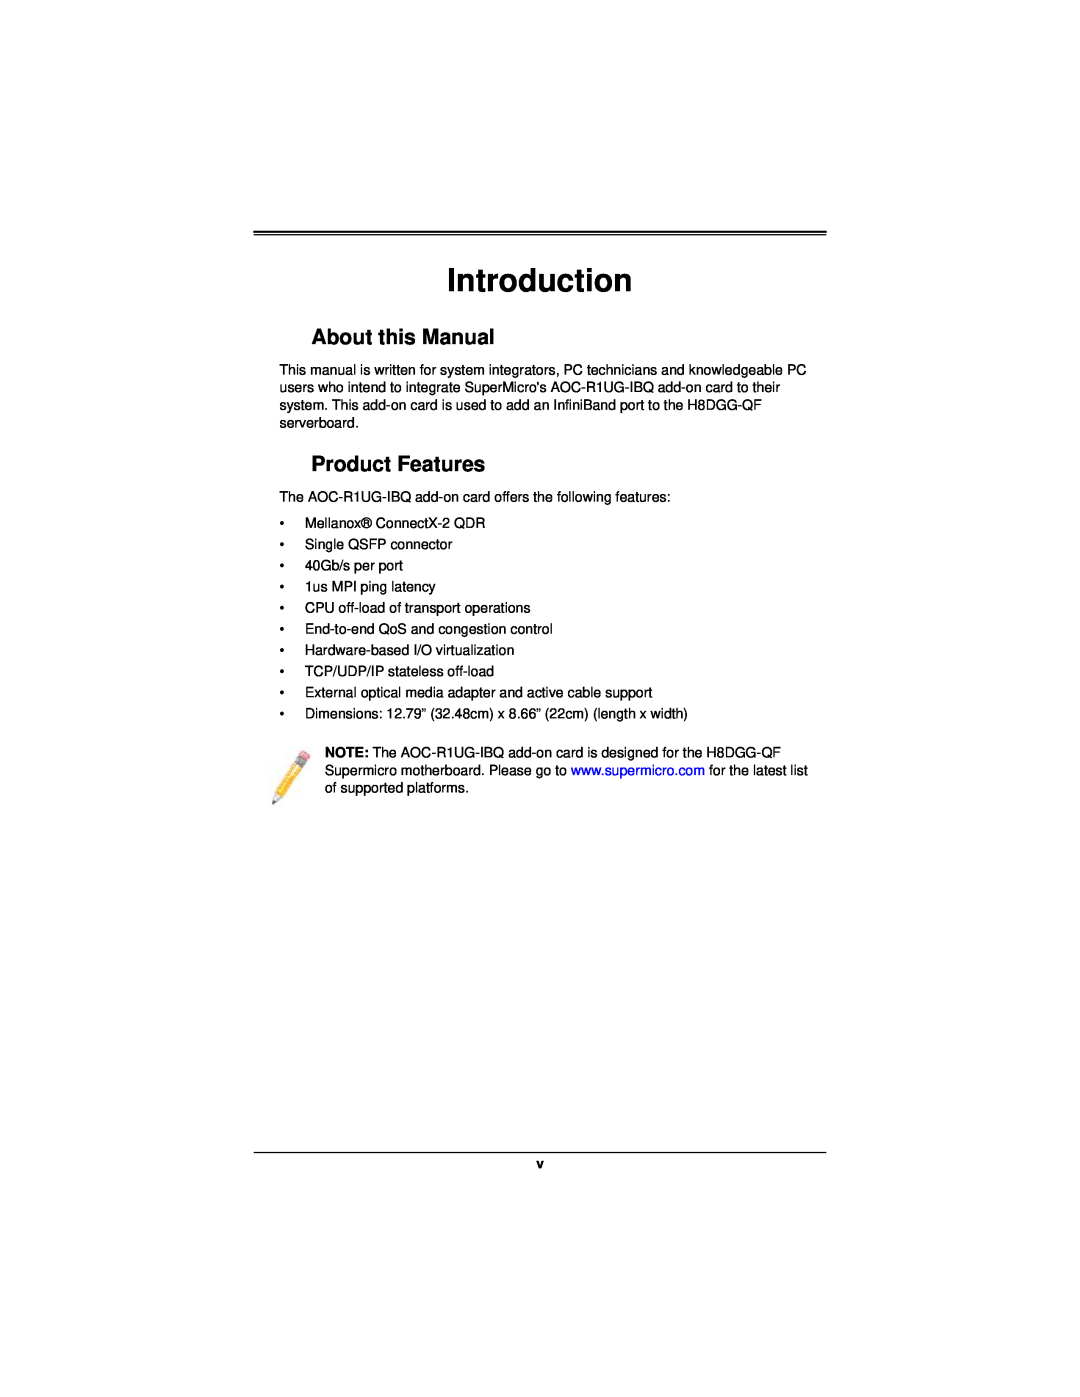 SUPER MICRO Computer AOC-R1UG-IBQ manual Introduction, About this Manual, Product Features 